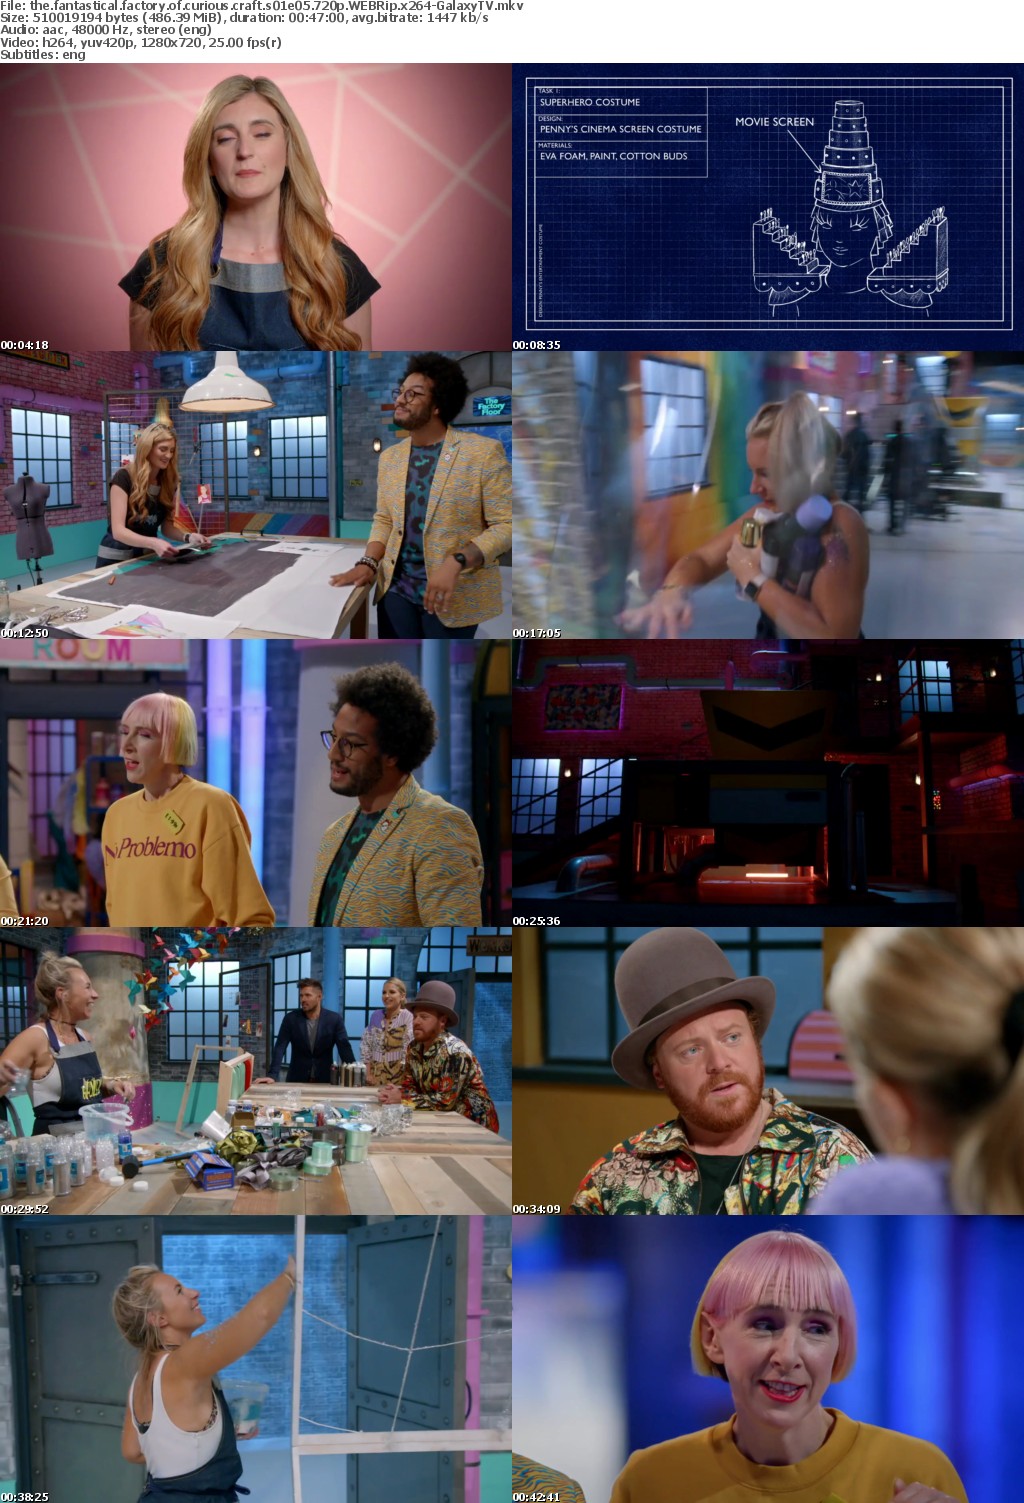 The Fantastical Factory Of Curious Craft S01 COMPLETE 720p WEBRip x264-GalaxyTV